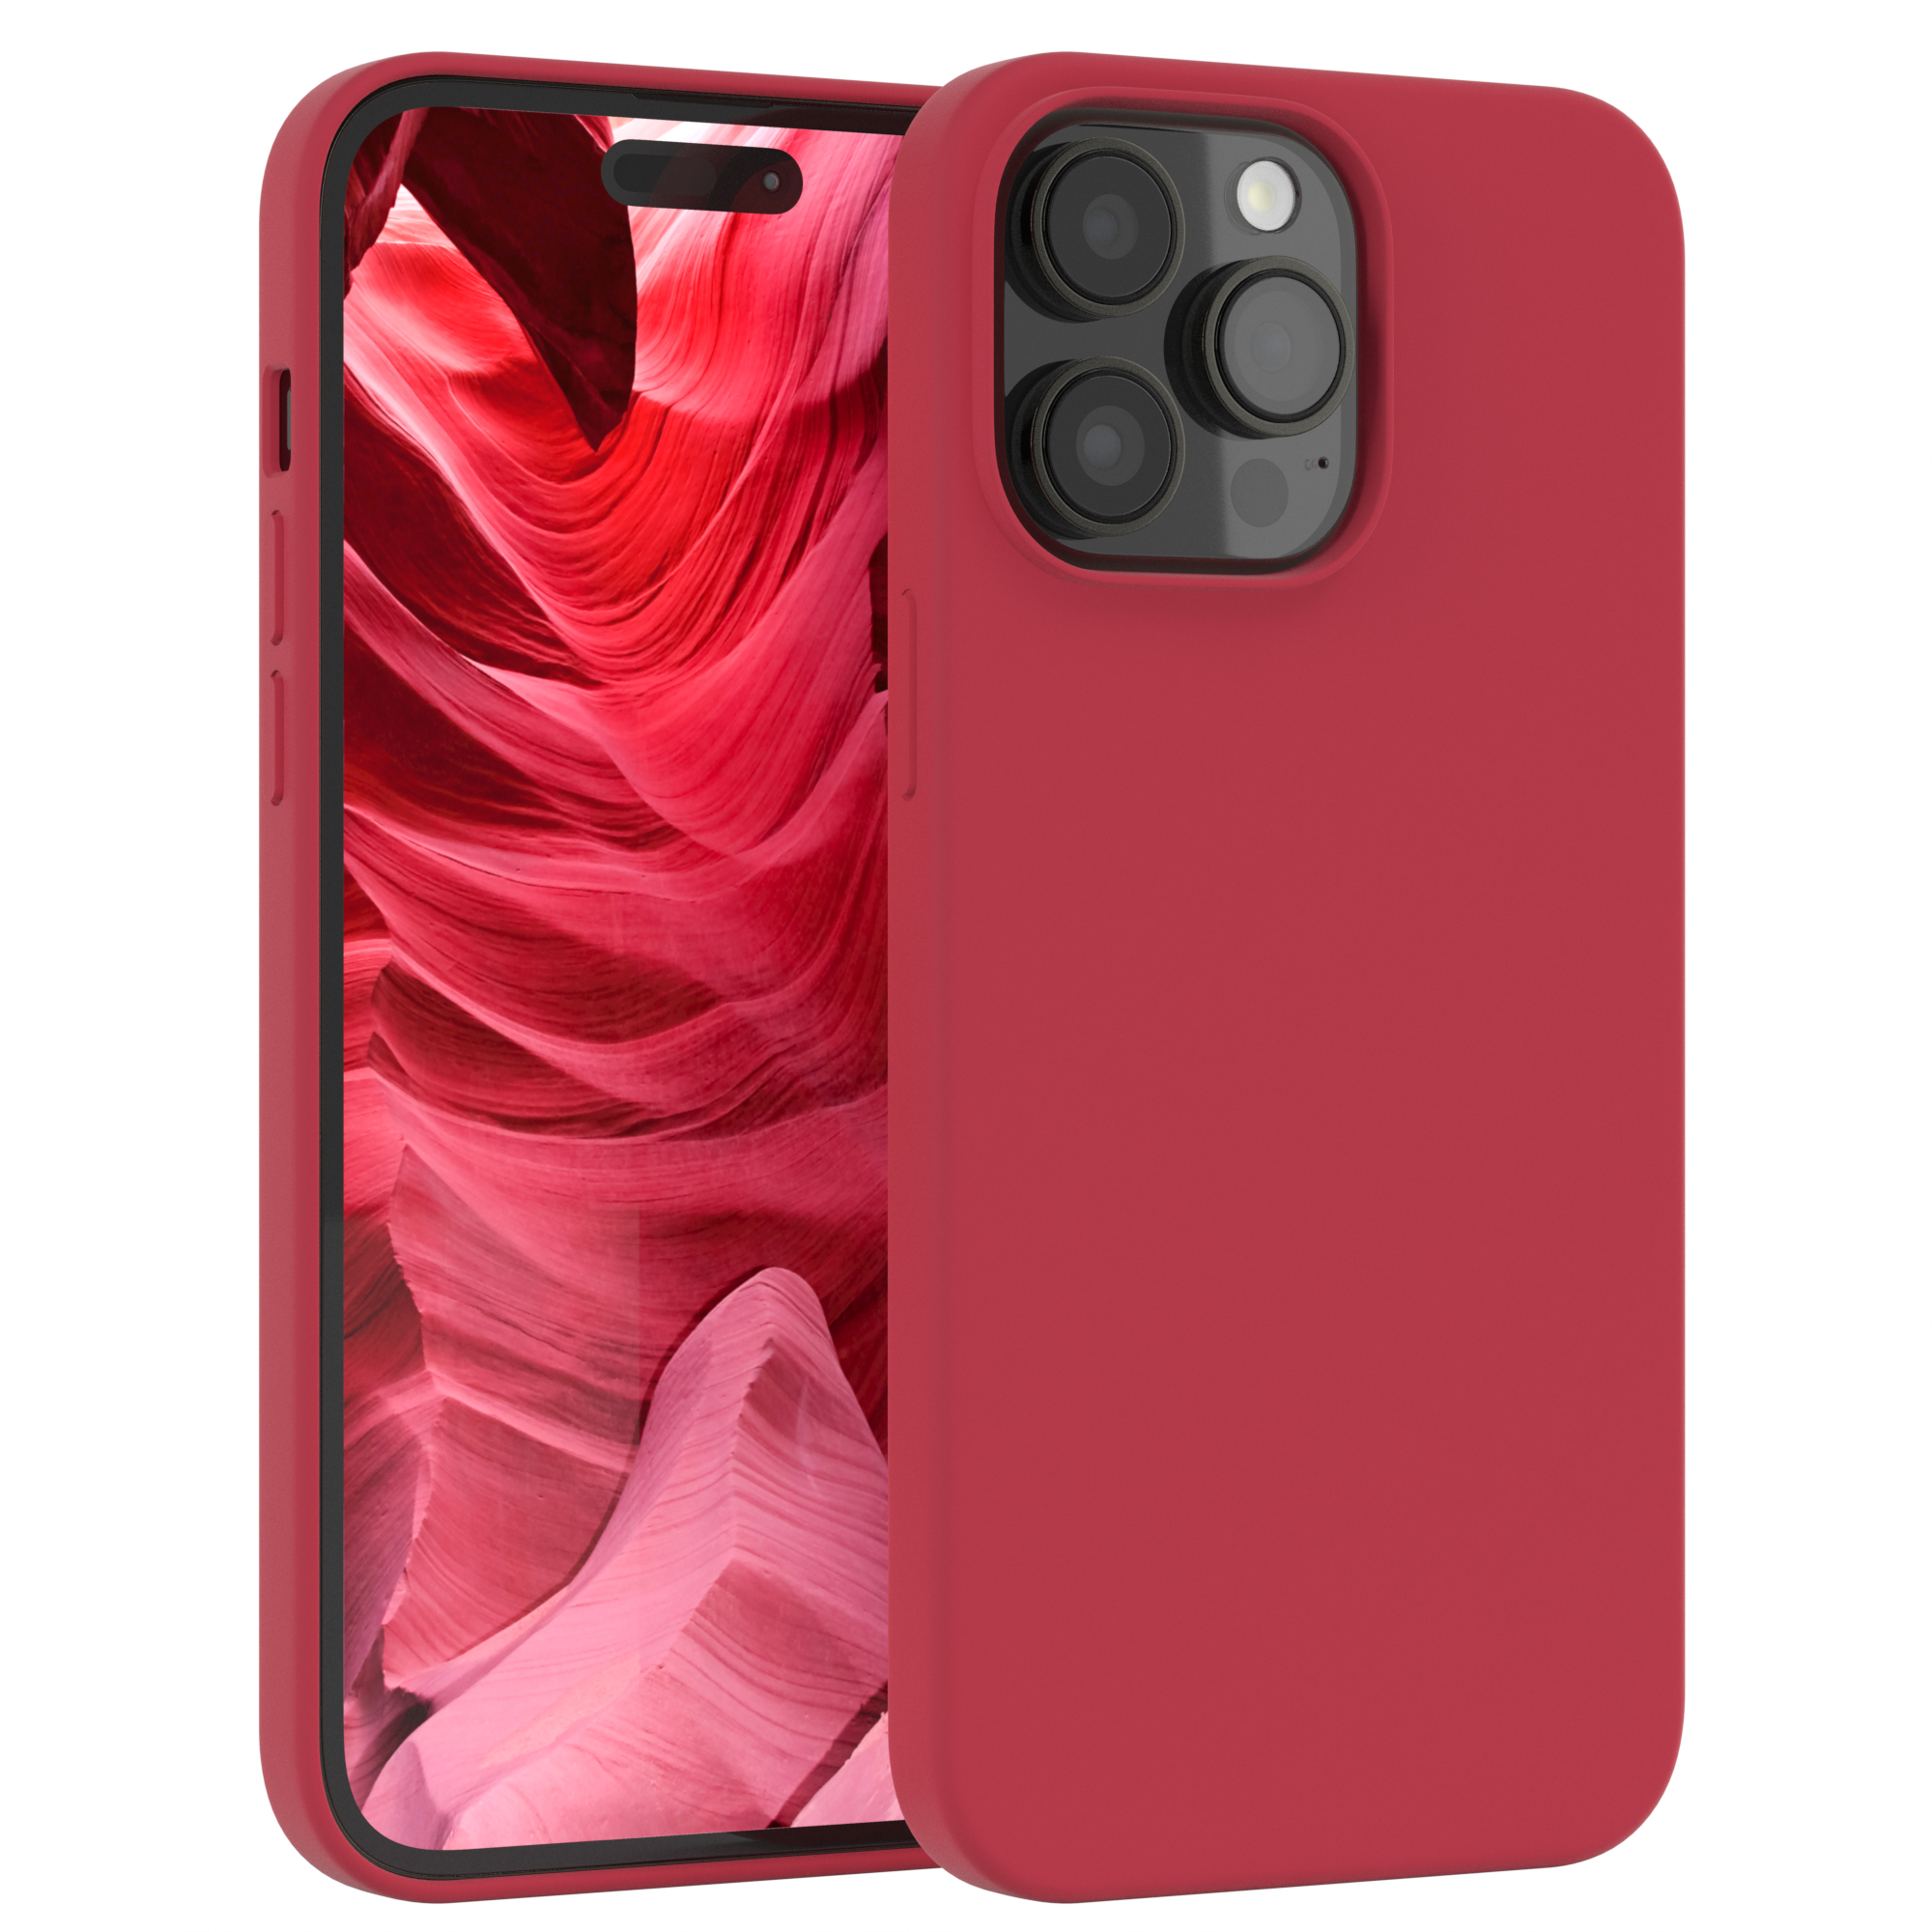 Pro Backcover, Premium Max, / 14 Apple, EAZY Handycase, Beere Rot Silikon CASE iPhone